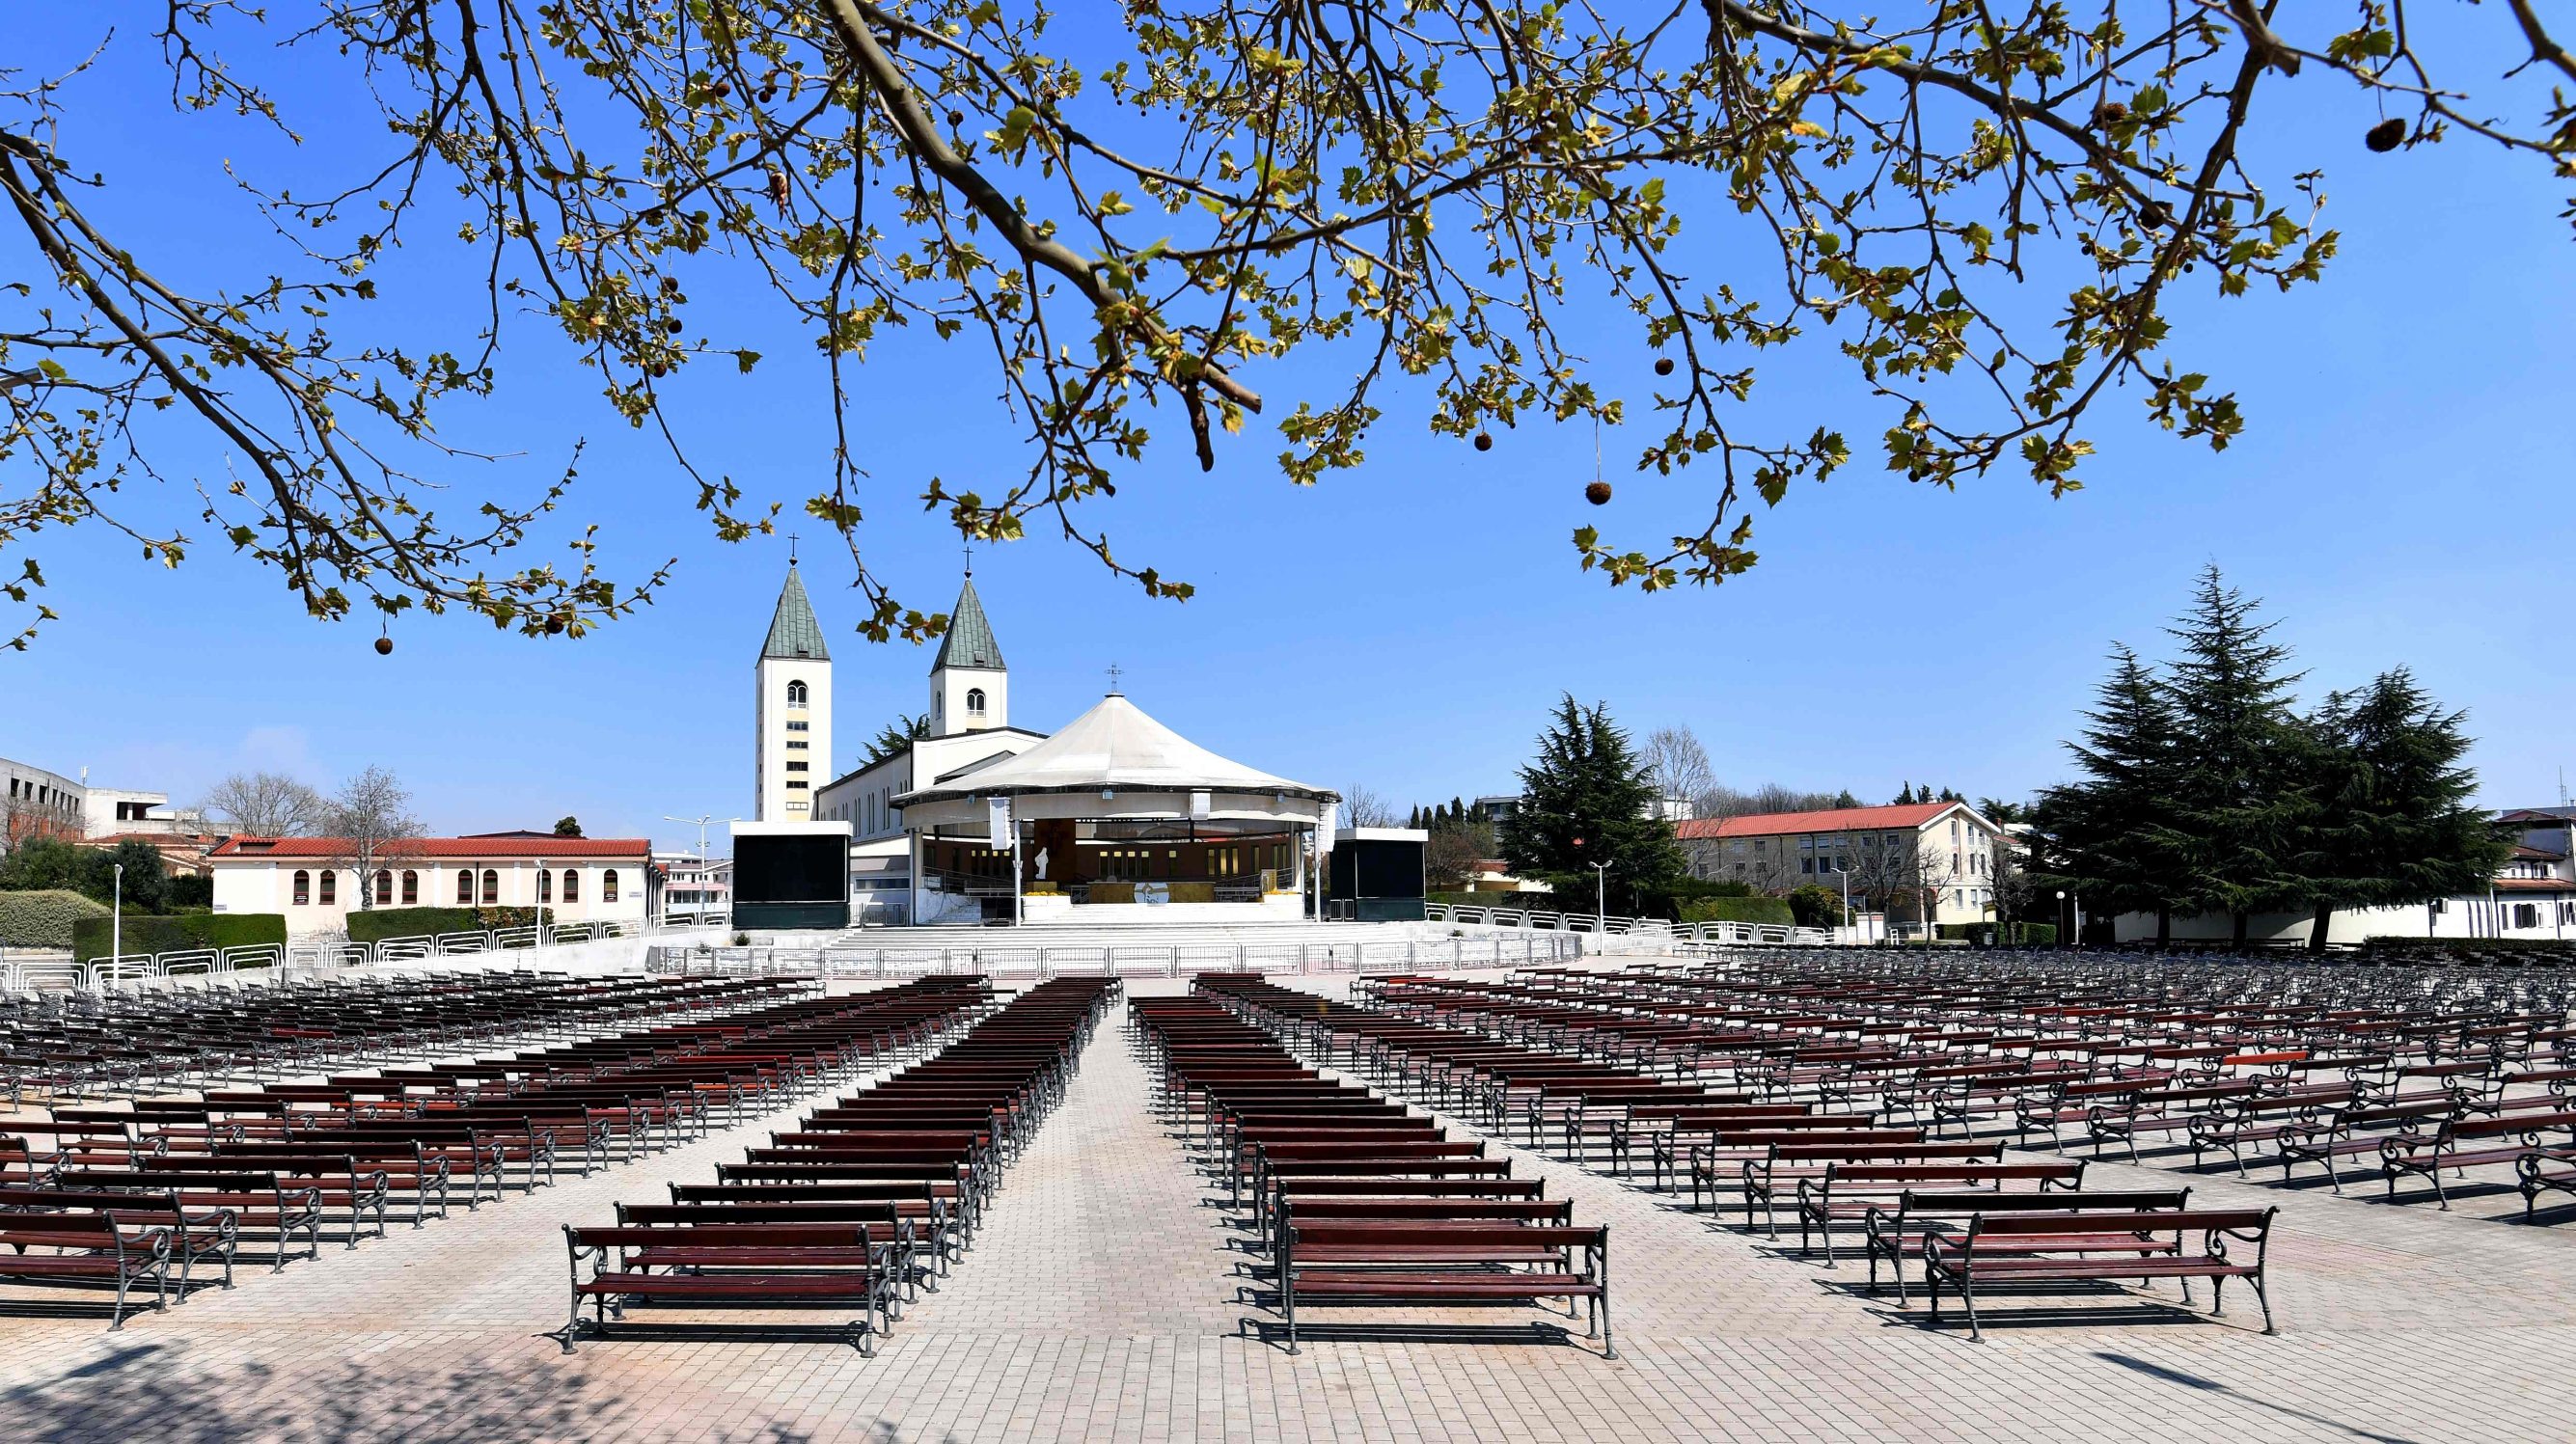 General view of the empty auditorium of St Jacob church, at Marian pilgrimage site, in the southern Bosnian town of Medjugorje, usually riddled with thousands of Catholic believers, on April 7, 2020 during a lockdown to stop the spread of COVID-19 (novel coronavirus). - Ever since the Virgin Mary was said to appear before six teenagers on a hill in Bosnia four decades ago, pilgrims have flocked to the town of Medjugorje, eager to witness a miracle. (Photo by ELVIS BARUKCIC / AFP)